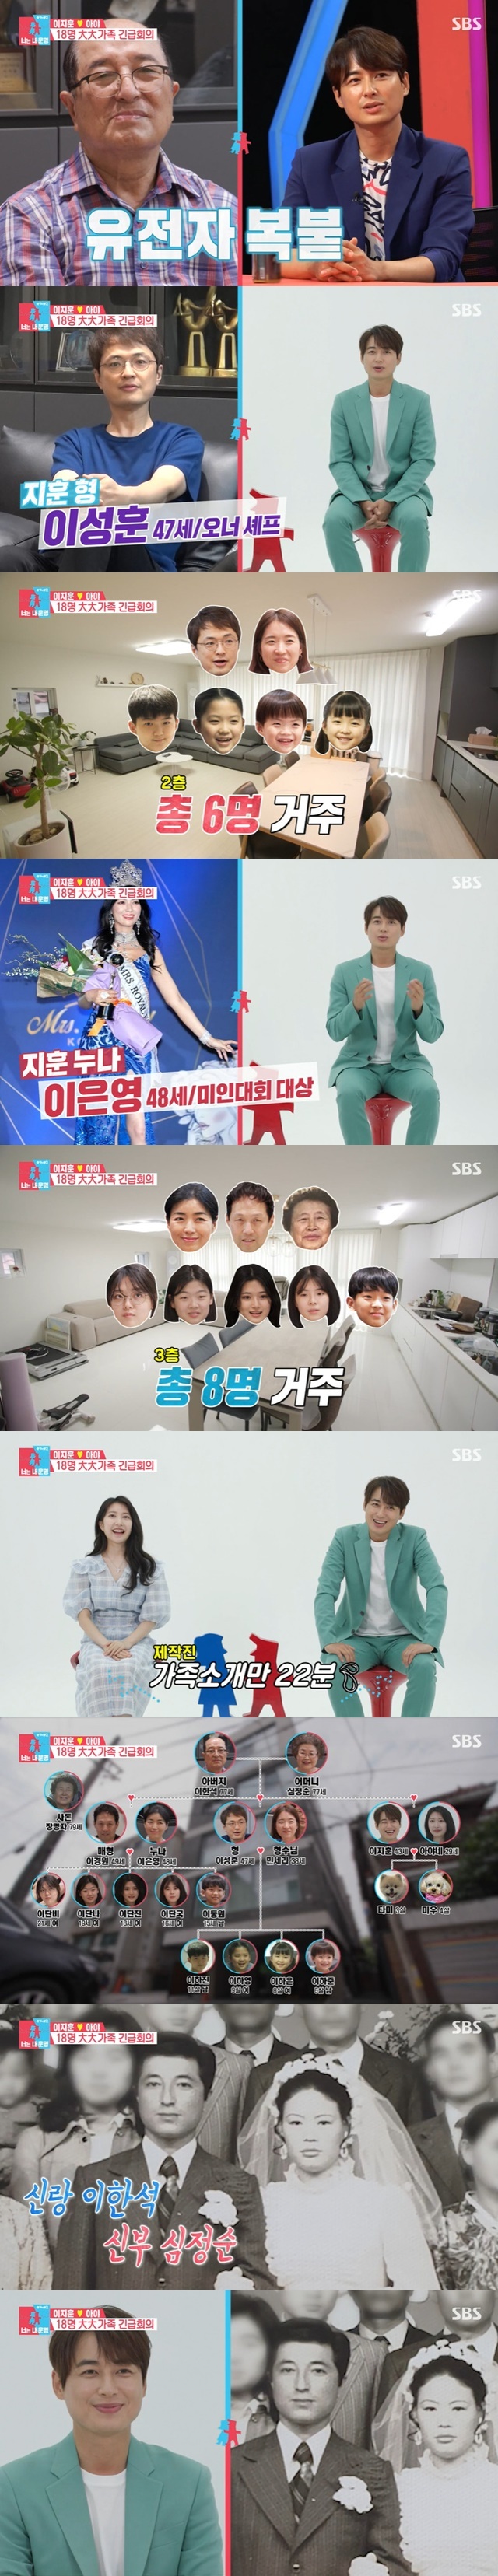 Lee Ji-hoon has revealed a large family to his Bungeo-pang father and a beauty pageant former sister.Lee Ji-hoon Sei Ashina and his wife called a family meeting and introduced 18 large families in SBS Same Bed, Different Dreams 2 Season 2 - You Are My Destiny broadcast on July 19th.Lee Ji-hoon and Sei Ashina organized a marriage ceremony and called a family meeting and family members gathered together.Lee Ji-hoon recounted the five-story house and extended family.First, Lee Ji-hoon said, The house is on the 5th floor, and there is a mothers fathers room on the first floor.My father and mother are 45 years old.Lee Ji-hoon then said, Theres a brother on the second floor. Different structures. Lots of rooms. Four-room structure. Youre a 75-year-old Italian chef.The nephews were 11 years old, 9 years old, 8 years old, 6 years old. On the third floor, the Sister family lives and is a multi-story structure. Lee Ji-hoon said, I took it off the fourth floor because of the large family.The brother-in-law runs the retail business and the sister is from a beauty pageant: 21, 19, 18, 16, 1 five-year-oldThe sister couple, five nephews, and the mother of the brother-in-law live in eight families.